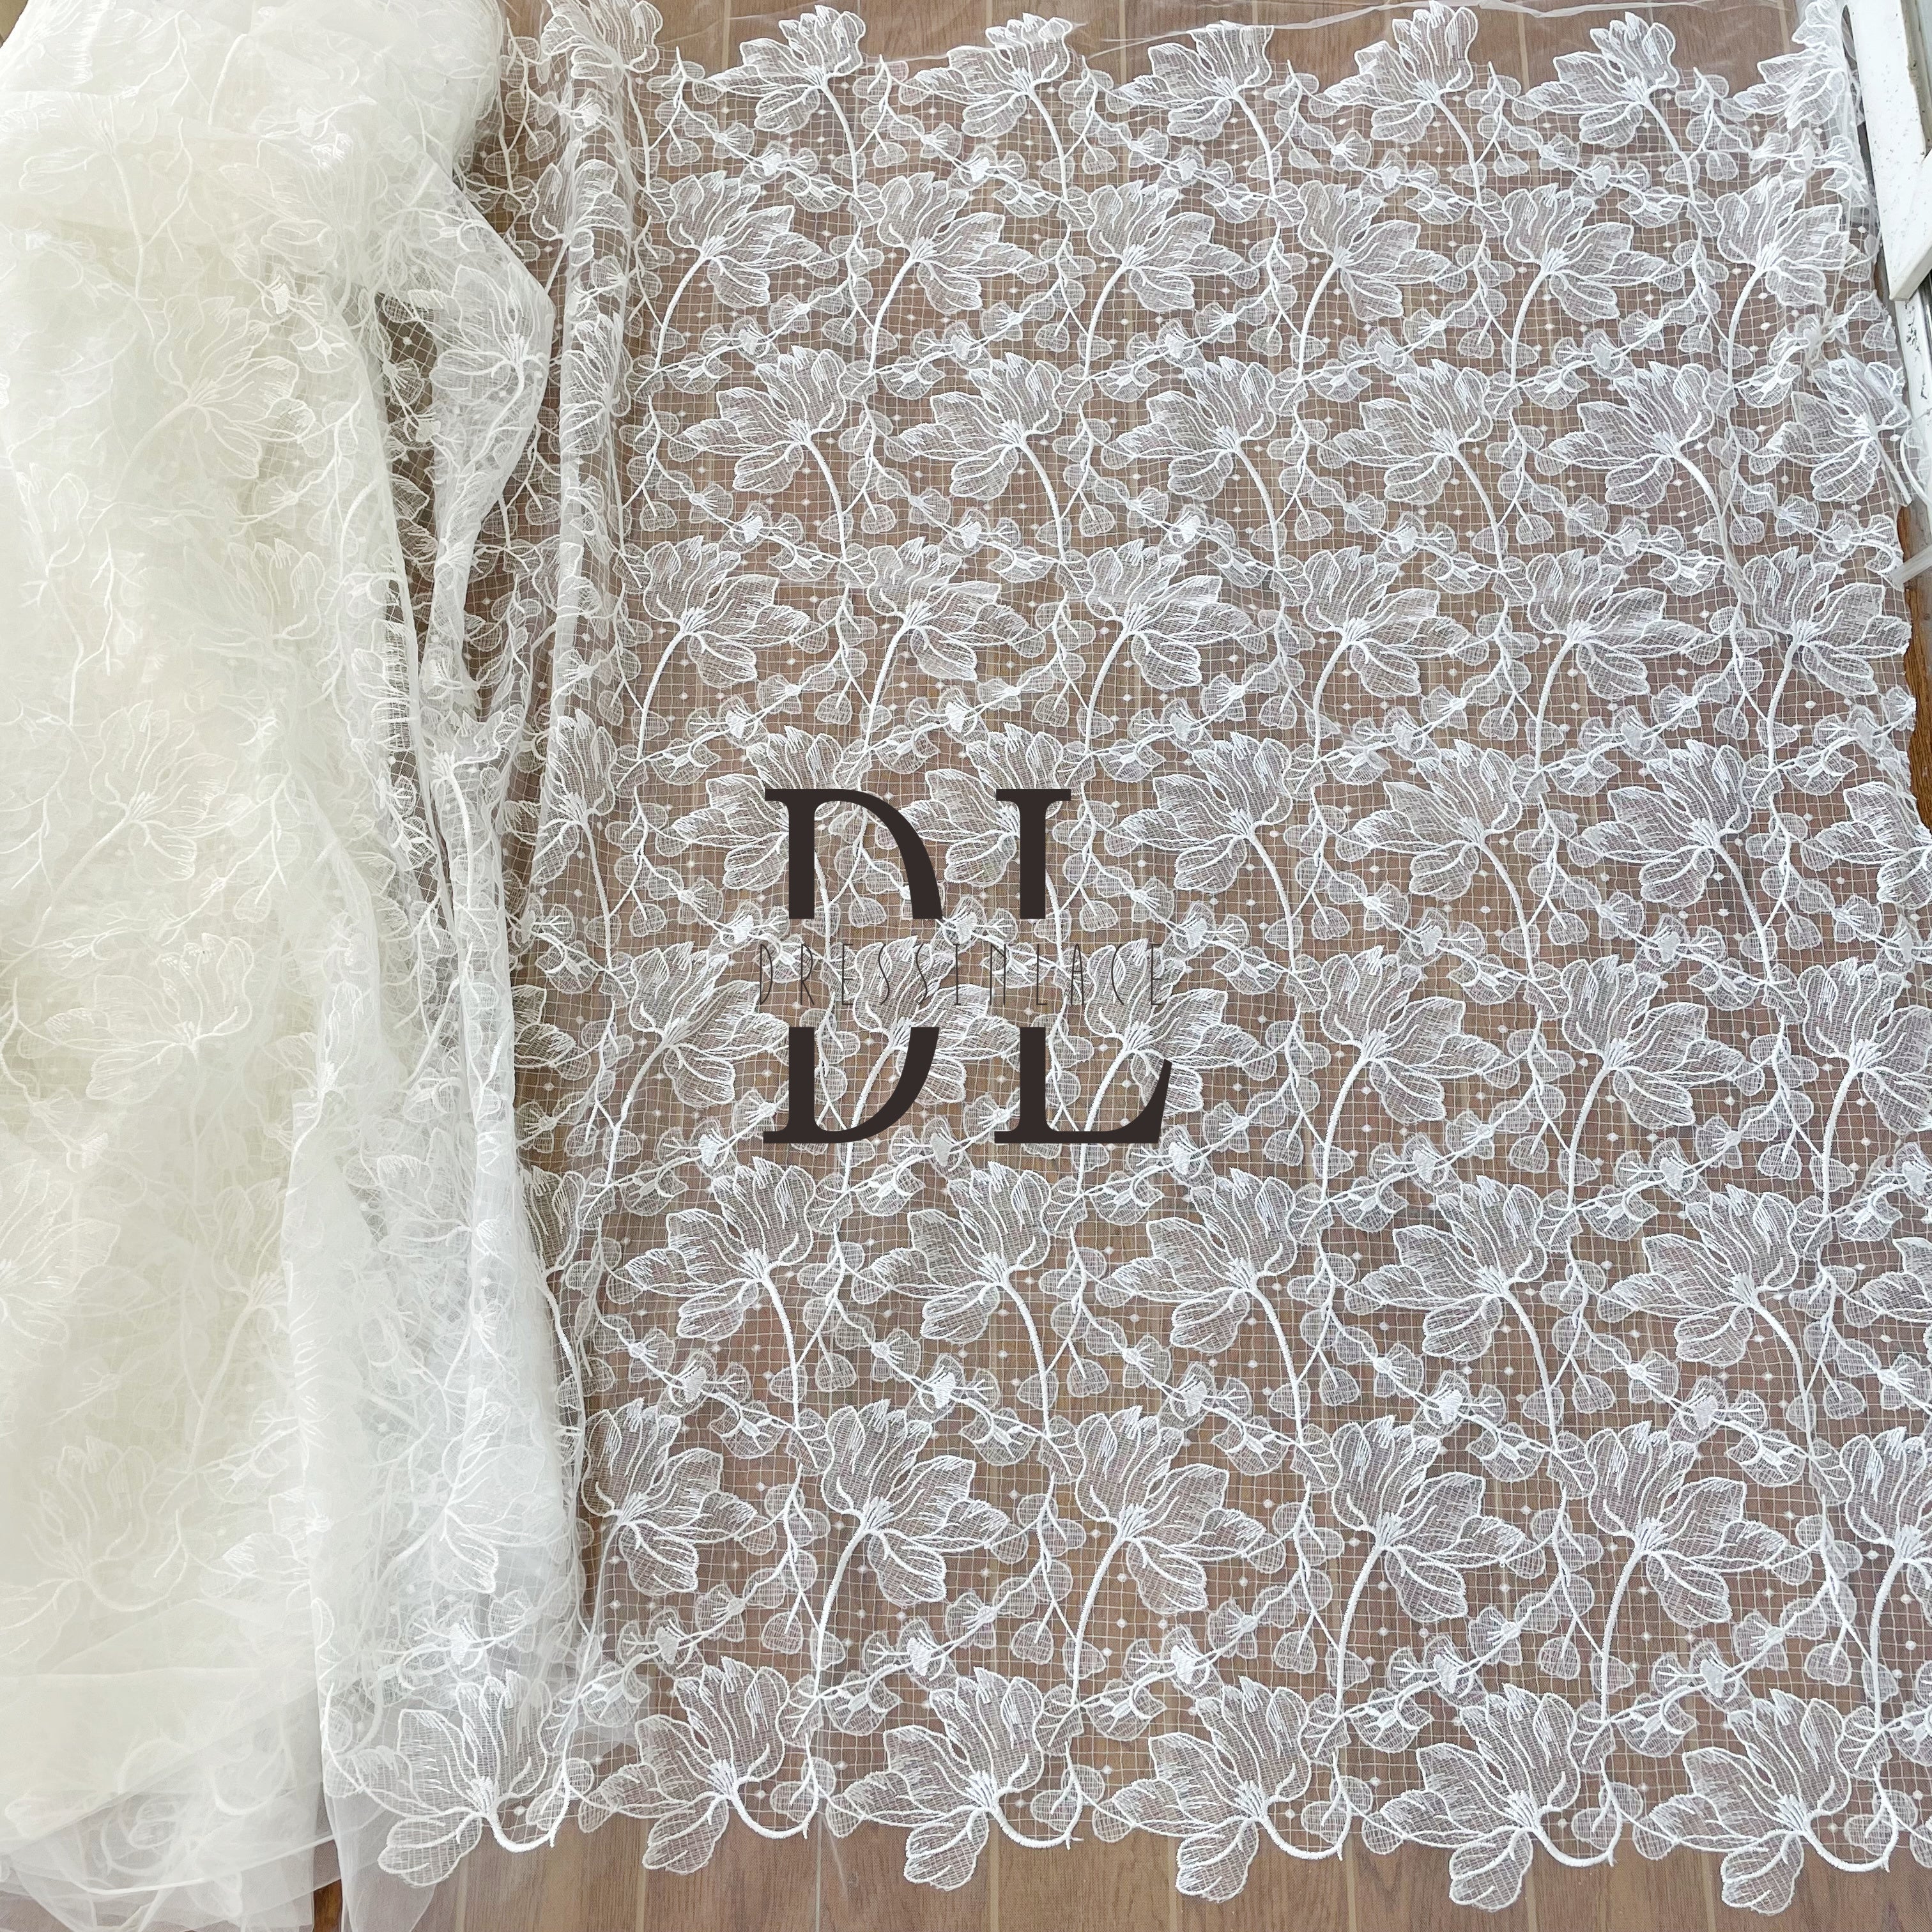 DL120124 Elegant Lace Fabric - Water Soluble, Showcasing Beauty - Must-Have for a Sophisticated Look DL120124